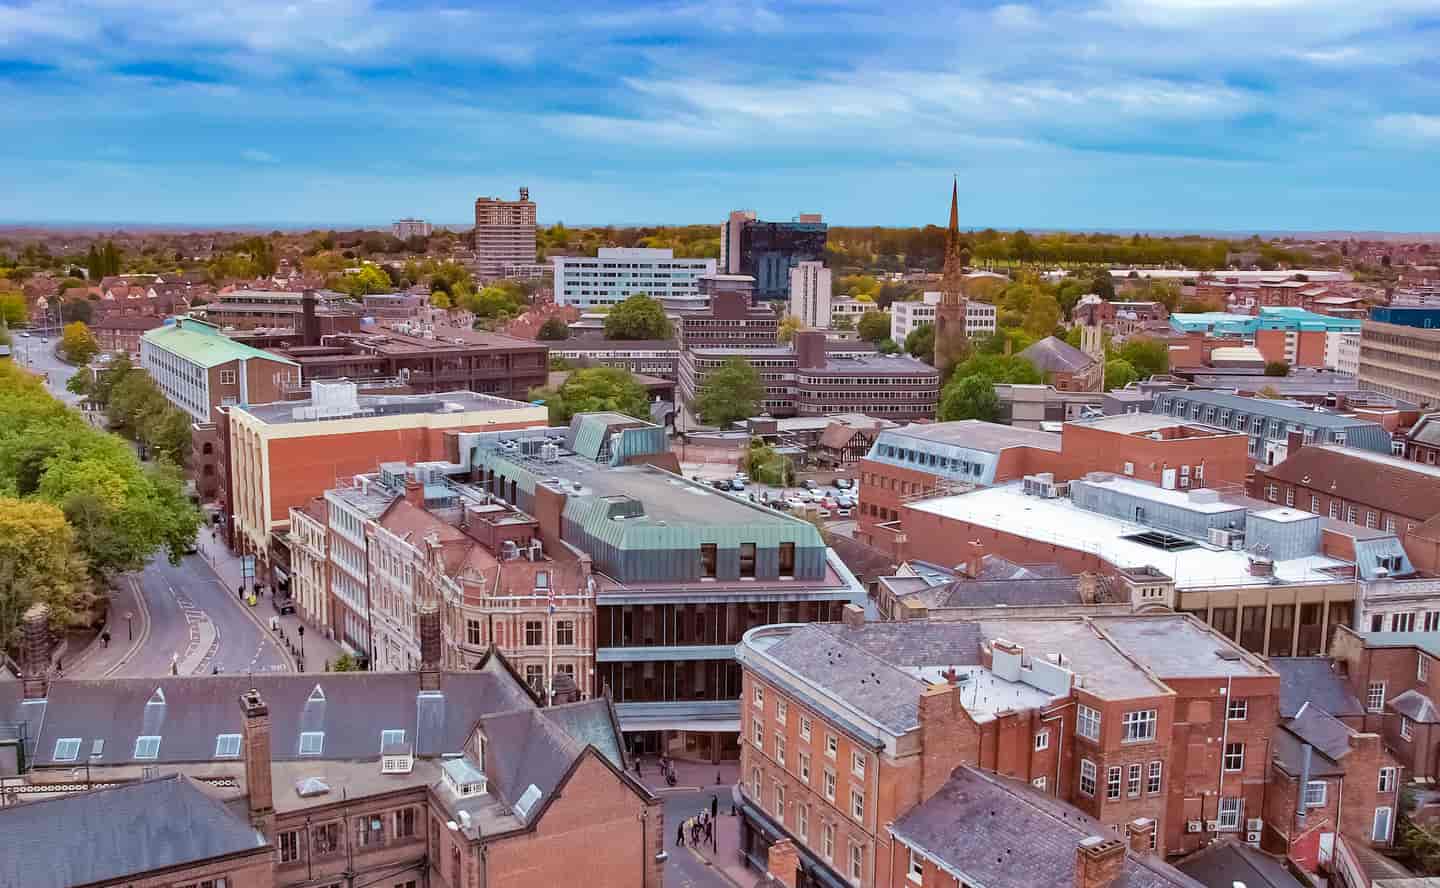 Student Accommodation in Coventry - Coventry city's skyline